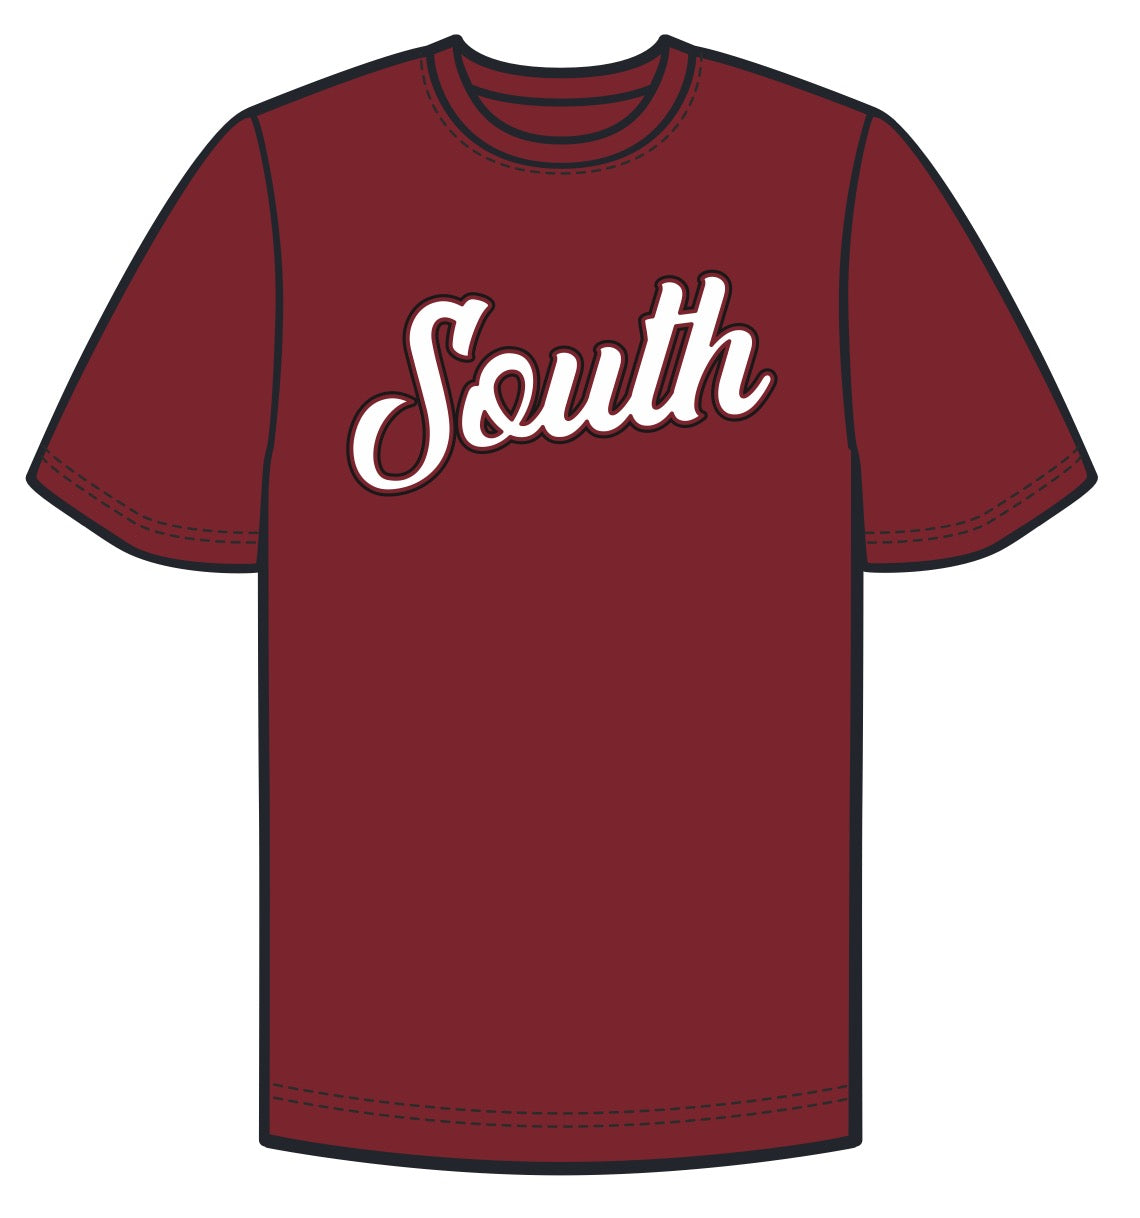 City Edition South Script Tee - Mobile